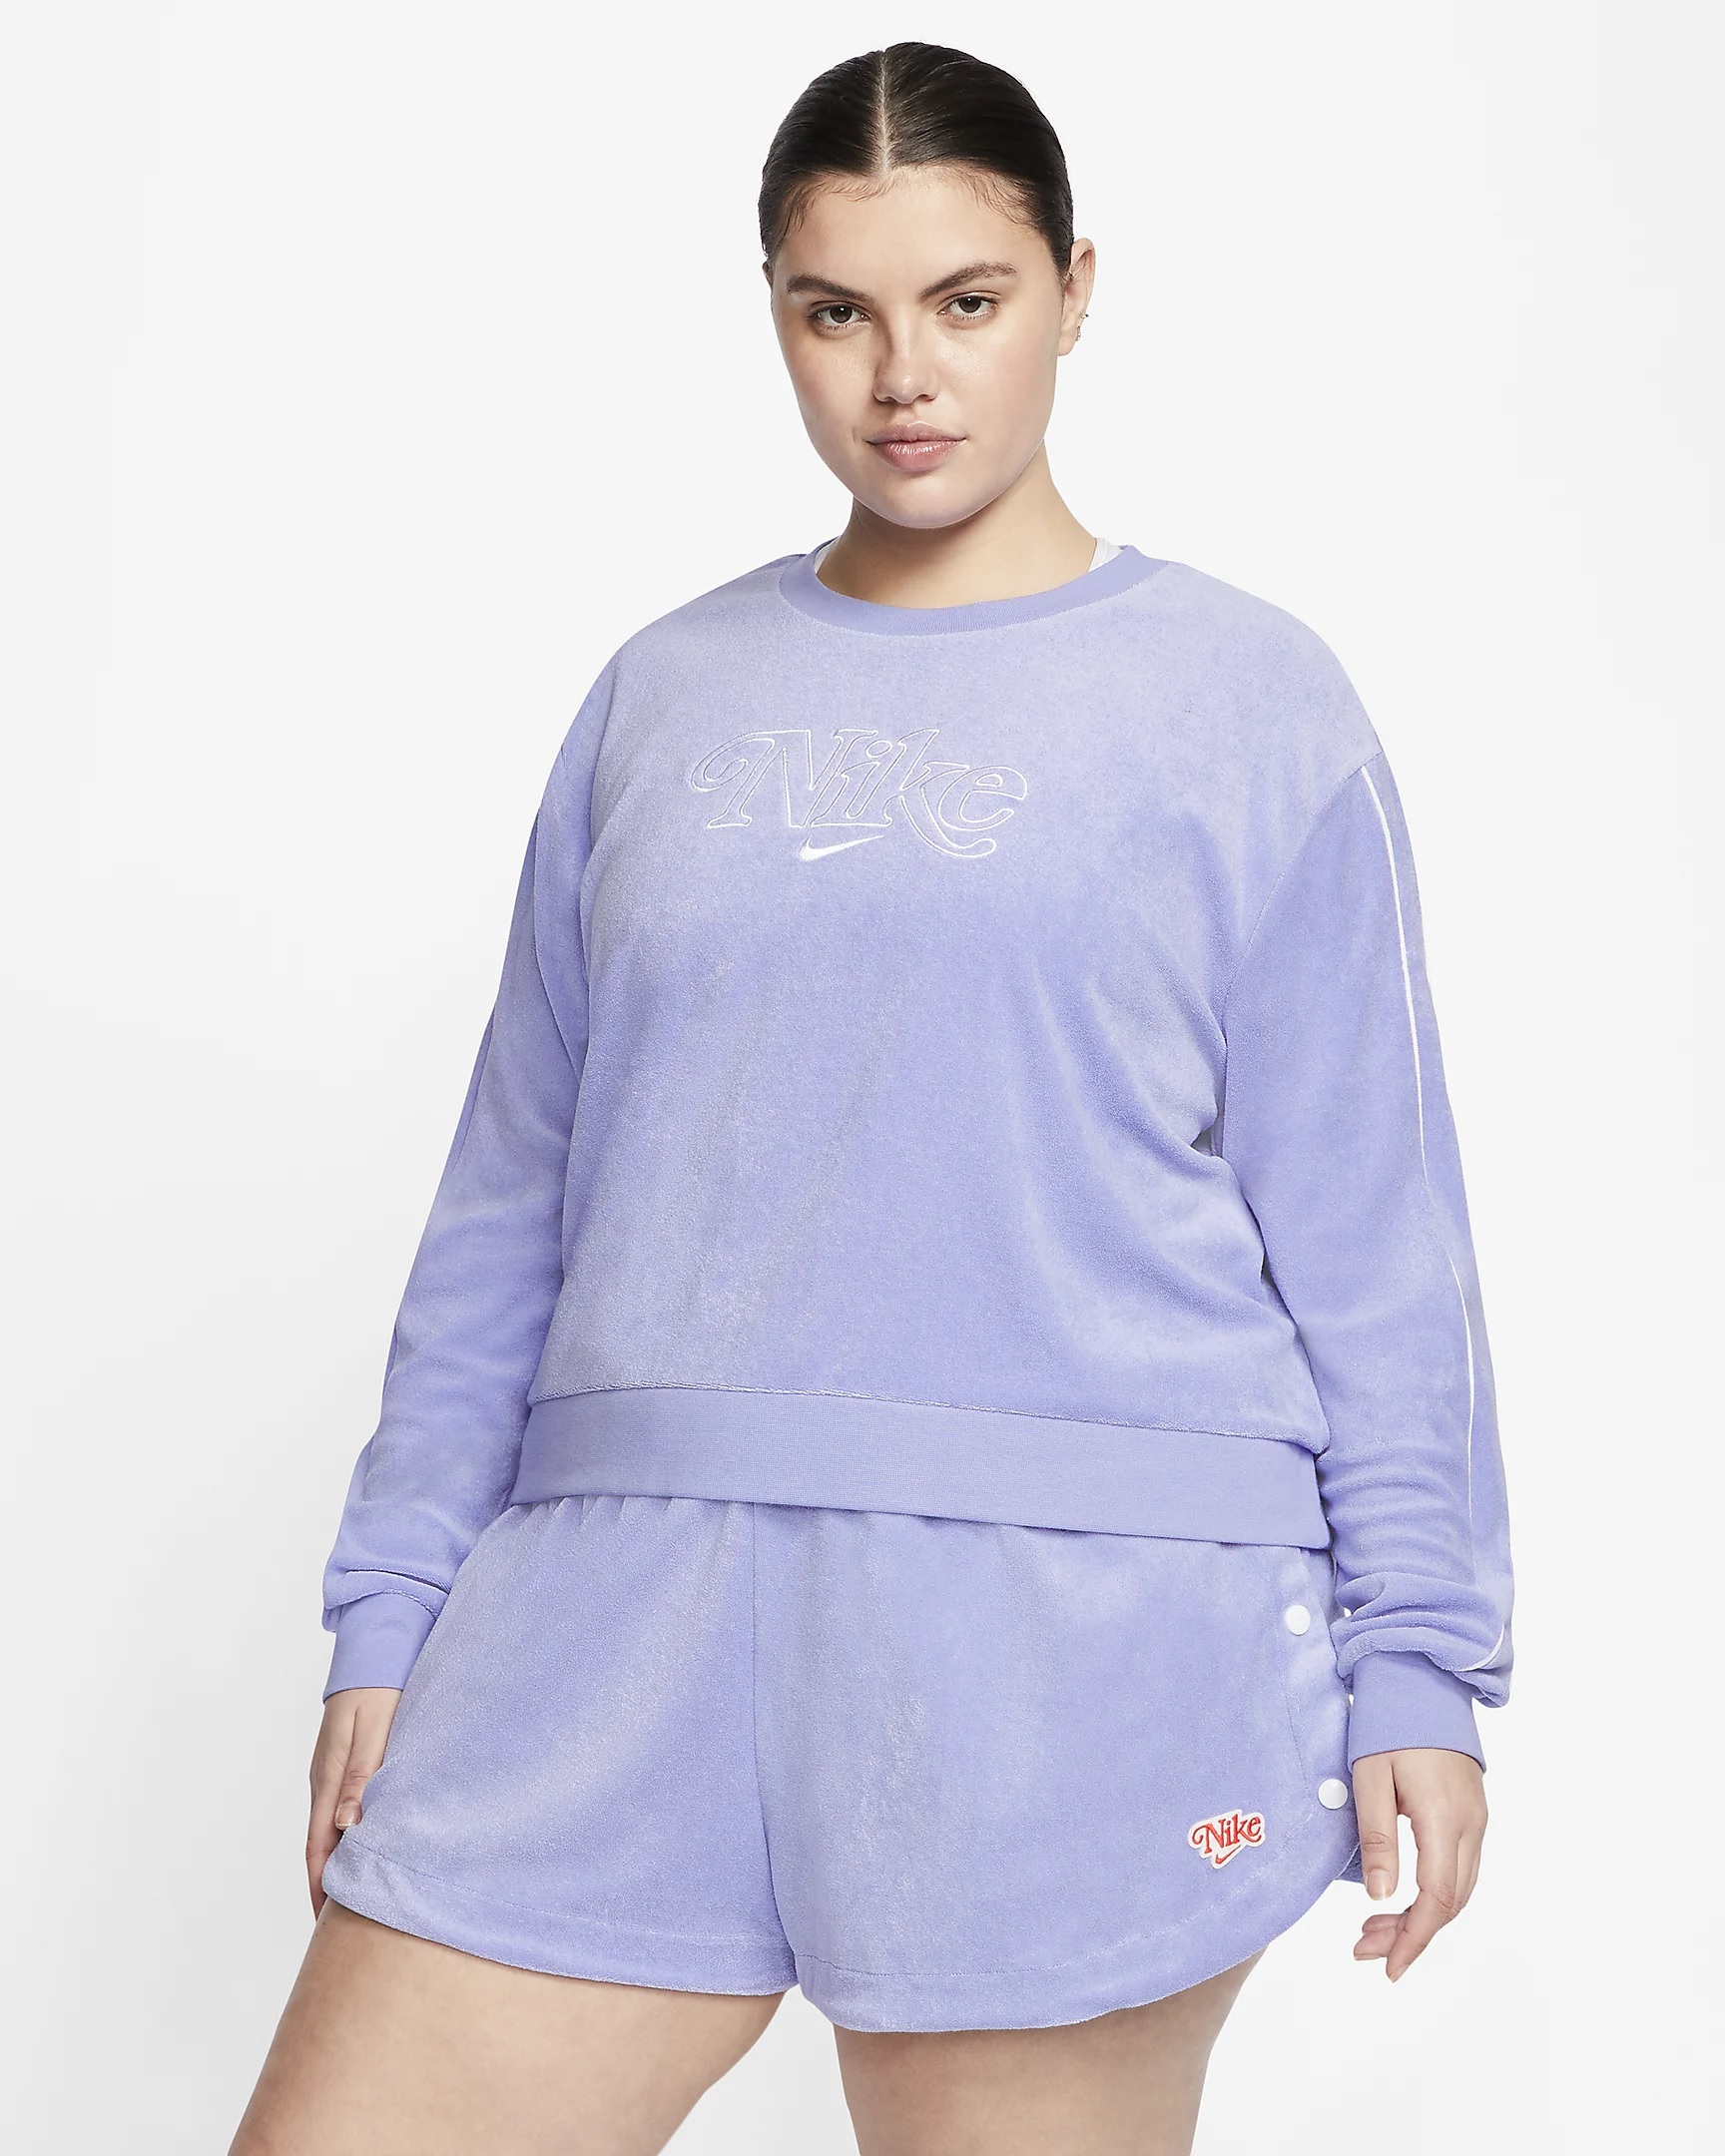 Nike Offers Up Perfect Cozy Terry Crew And Short Set For Chilling At ...